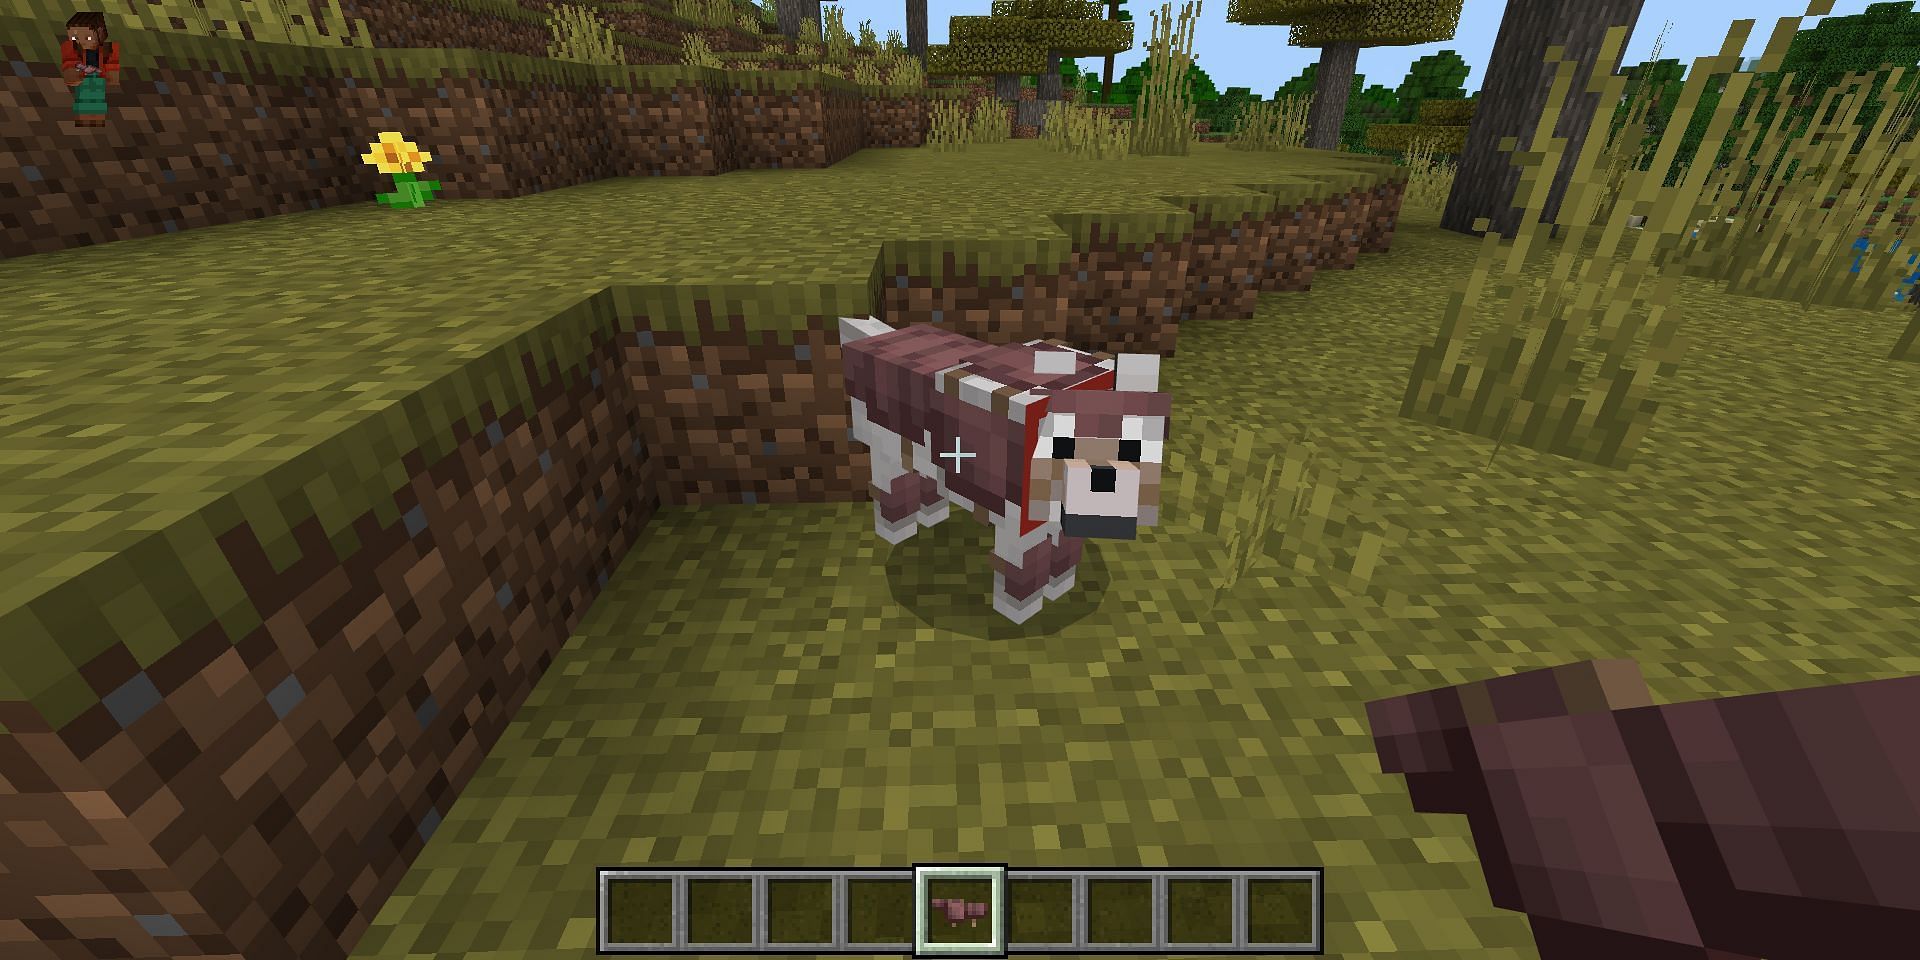 A pet wolf with armor equipped (Image via Mojang)